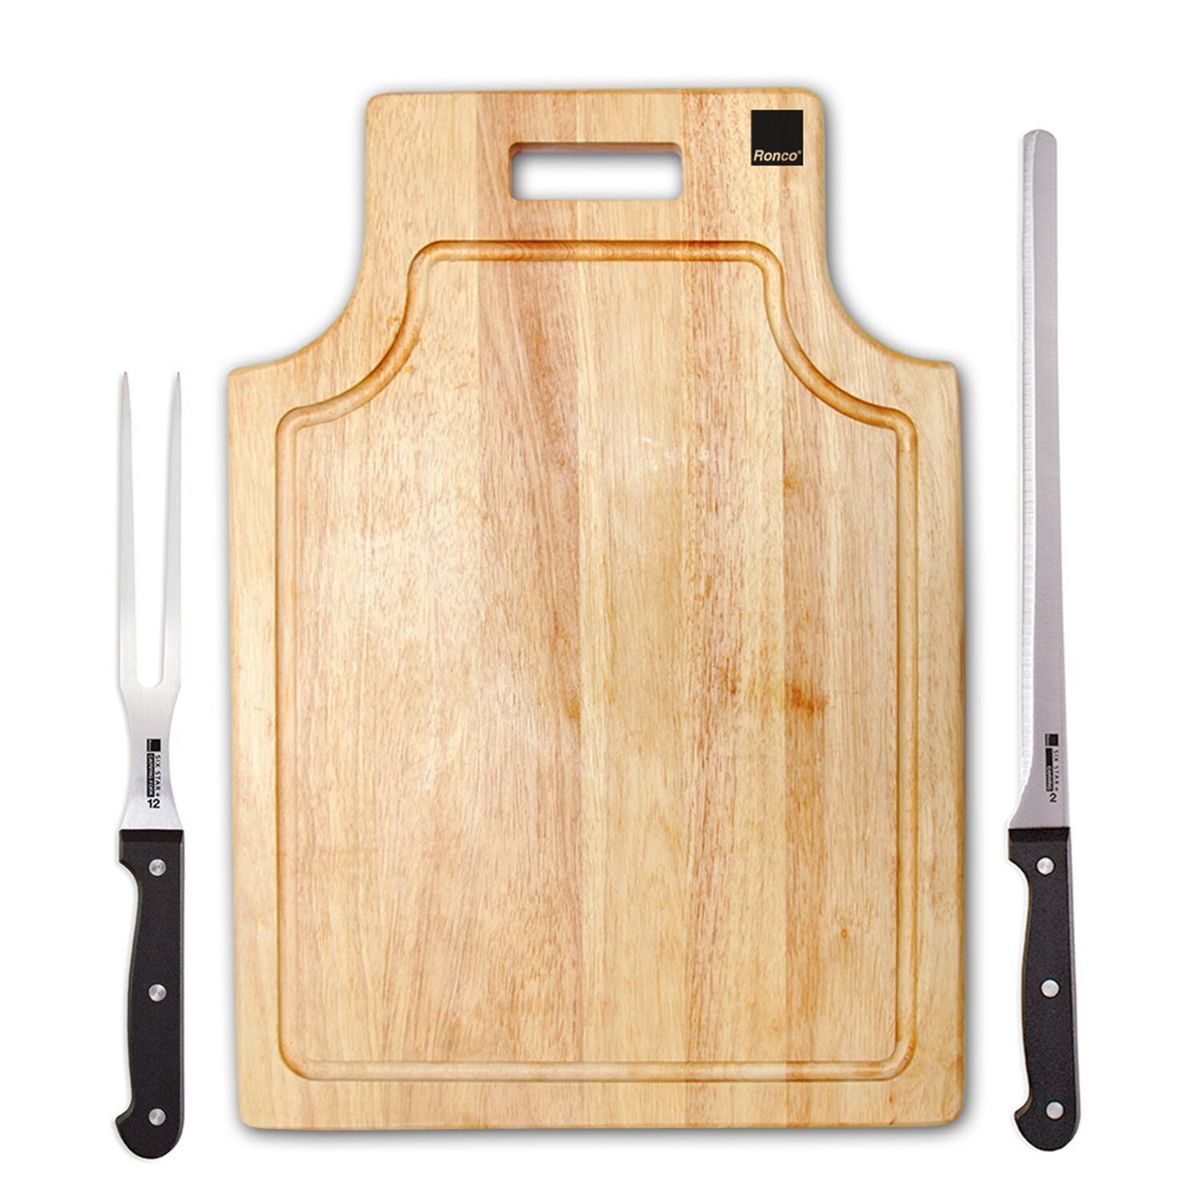 Ronco Carving Board Set, With Drip Catch Stainless Steel Carving Knife and Fork | Target